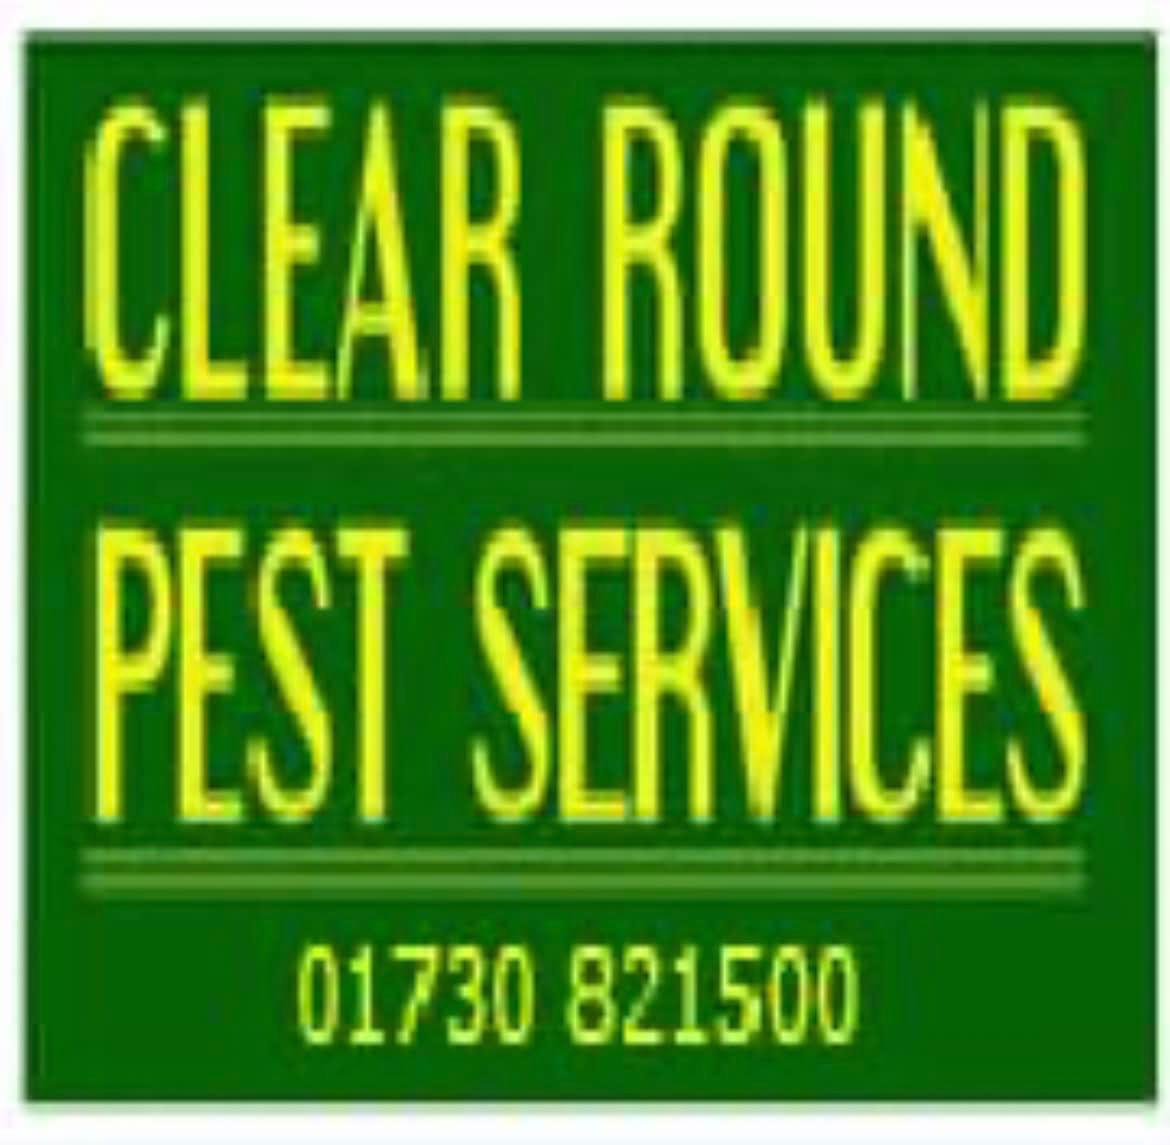 Clear Round Pest Services Petersfield 07973 867271